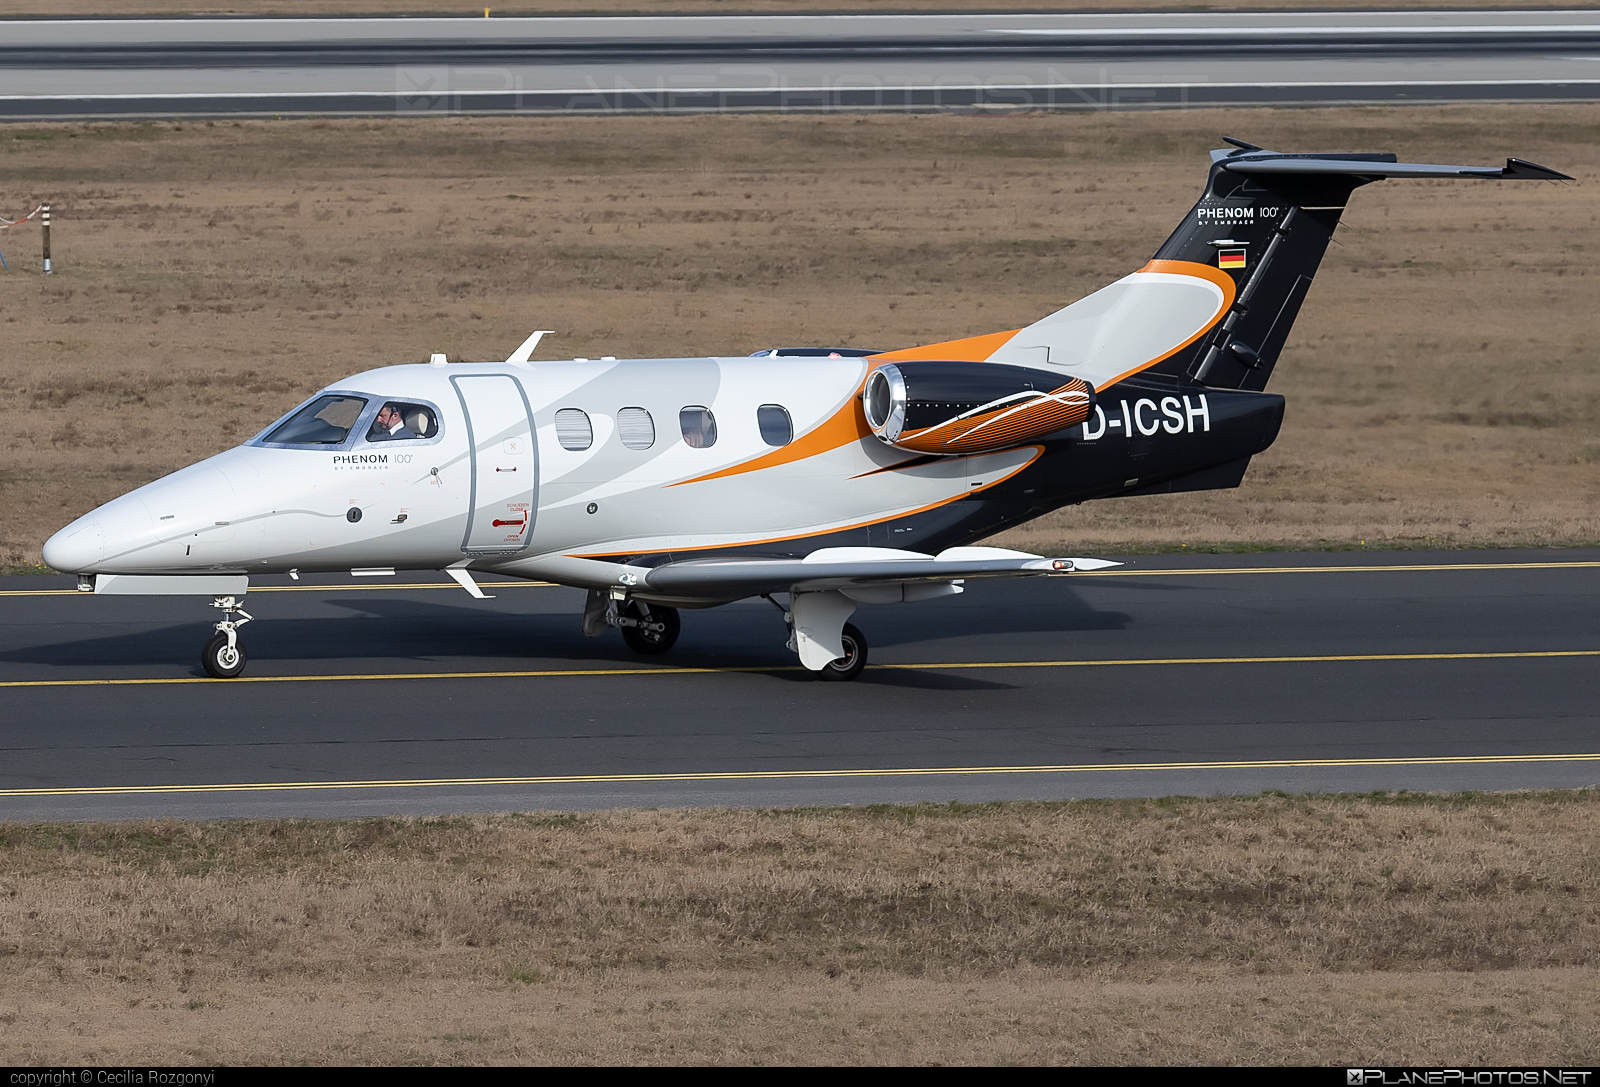 Embraer Phenom 100 (EMB-500) - D-ICSH operated by Private operator #emb500 #embraer #embraer500 #embraerphenom #embraerphenom100 #phenom100